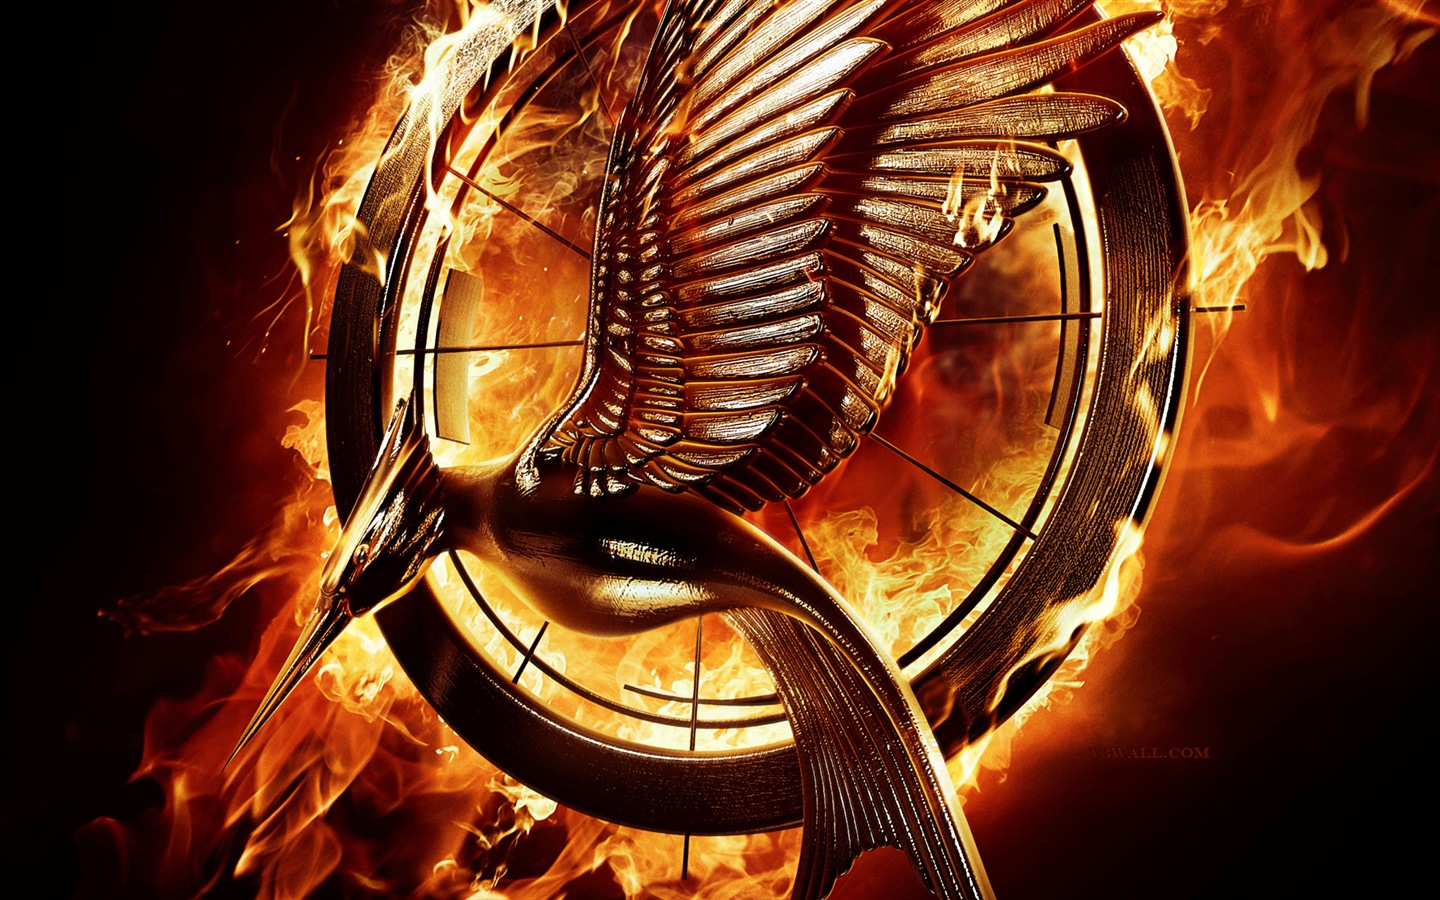 The Hunger Games: Catching Fire wallpapers HD #17 - 1440x900